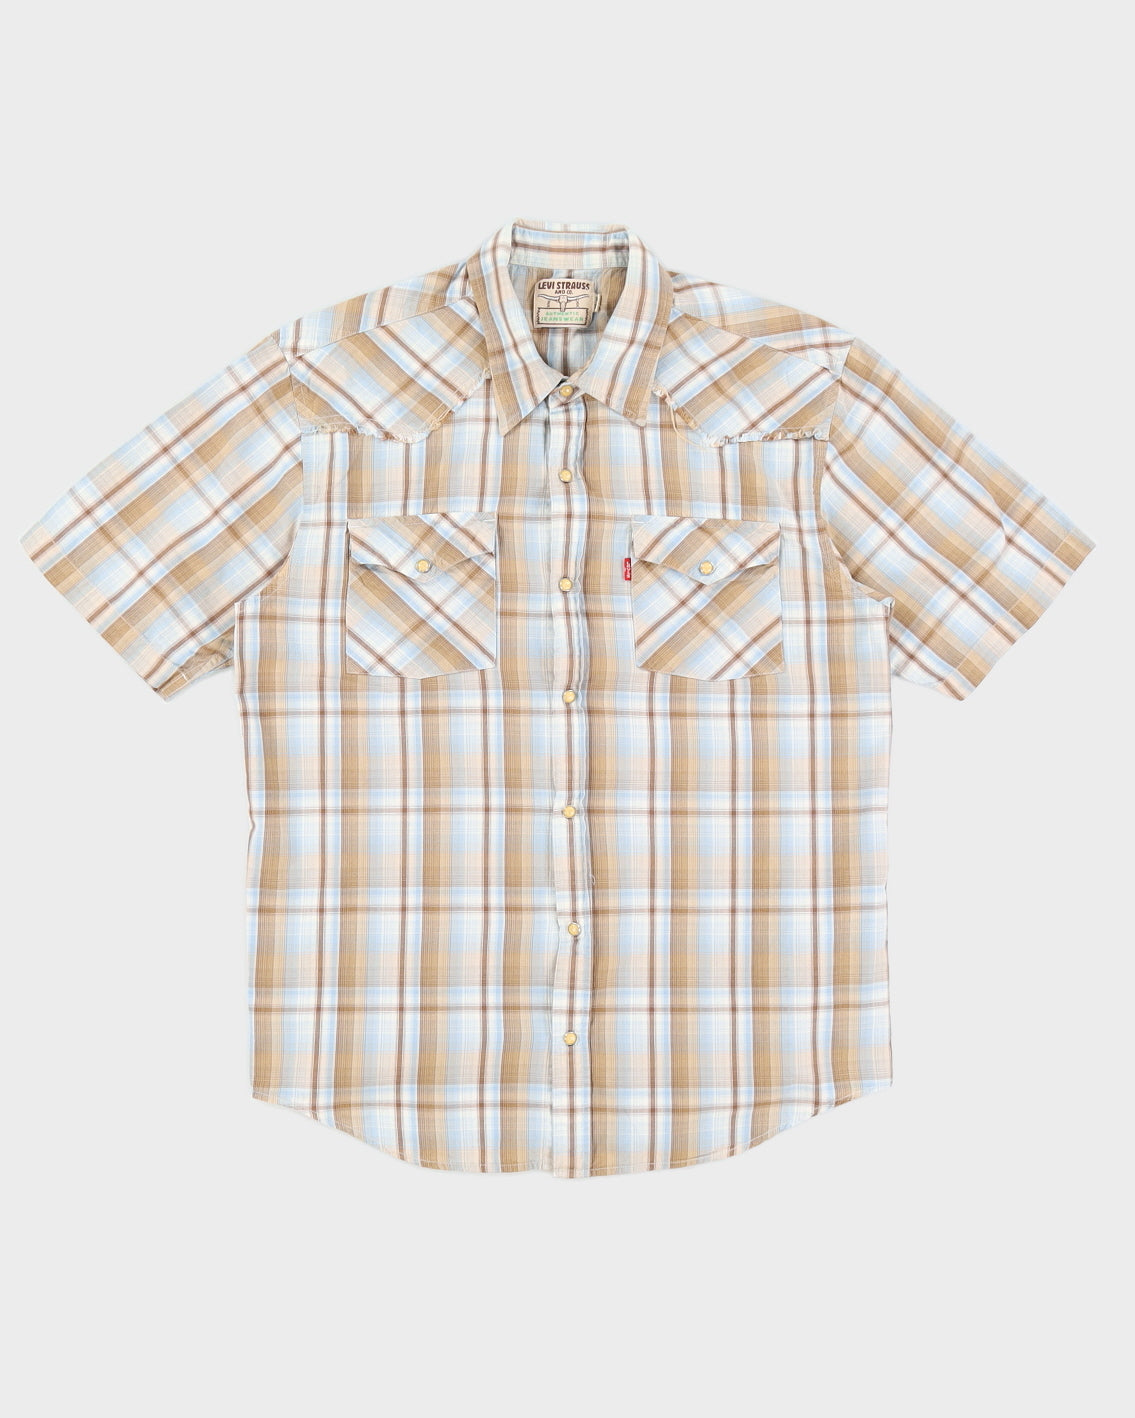 Levi's Blue And Beige Checked Western Shirt - S / M